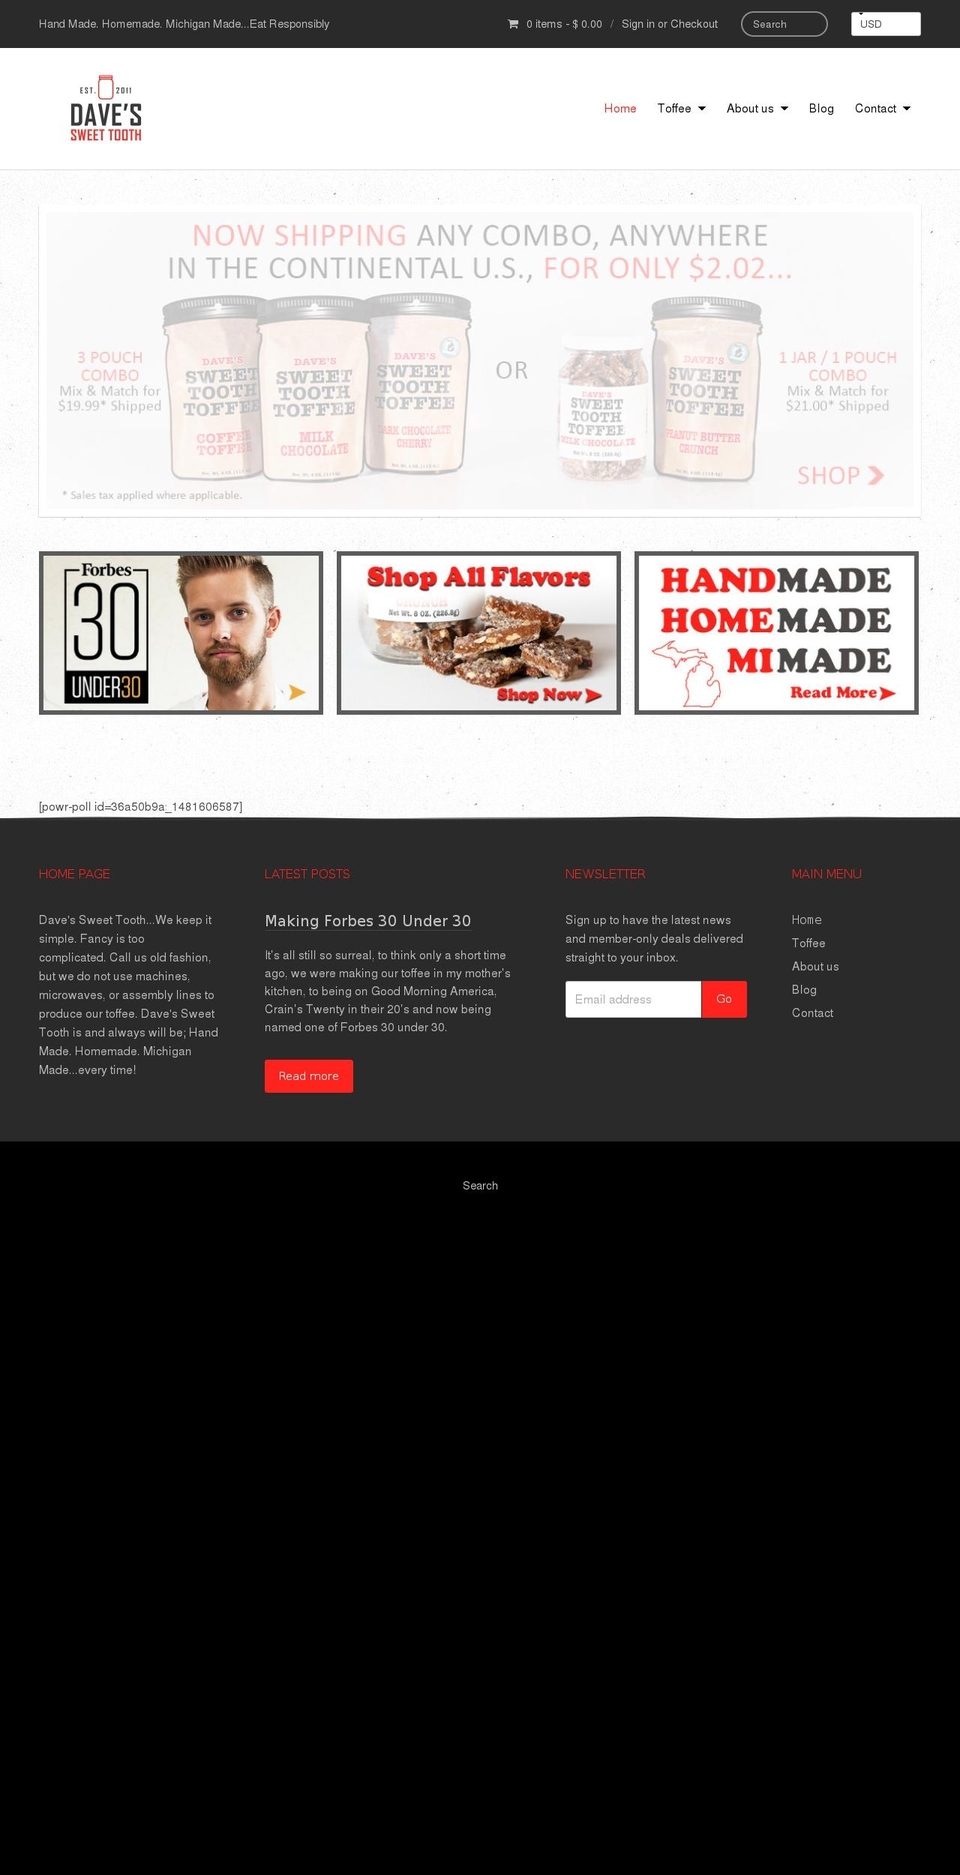 Modular Shopify theme site example davessweettooth.com